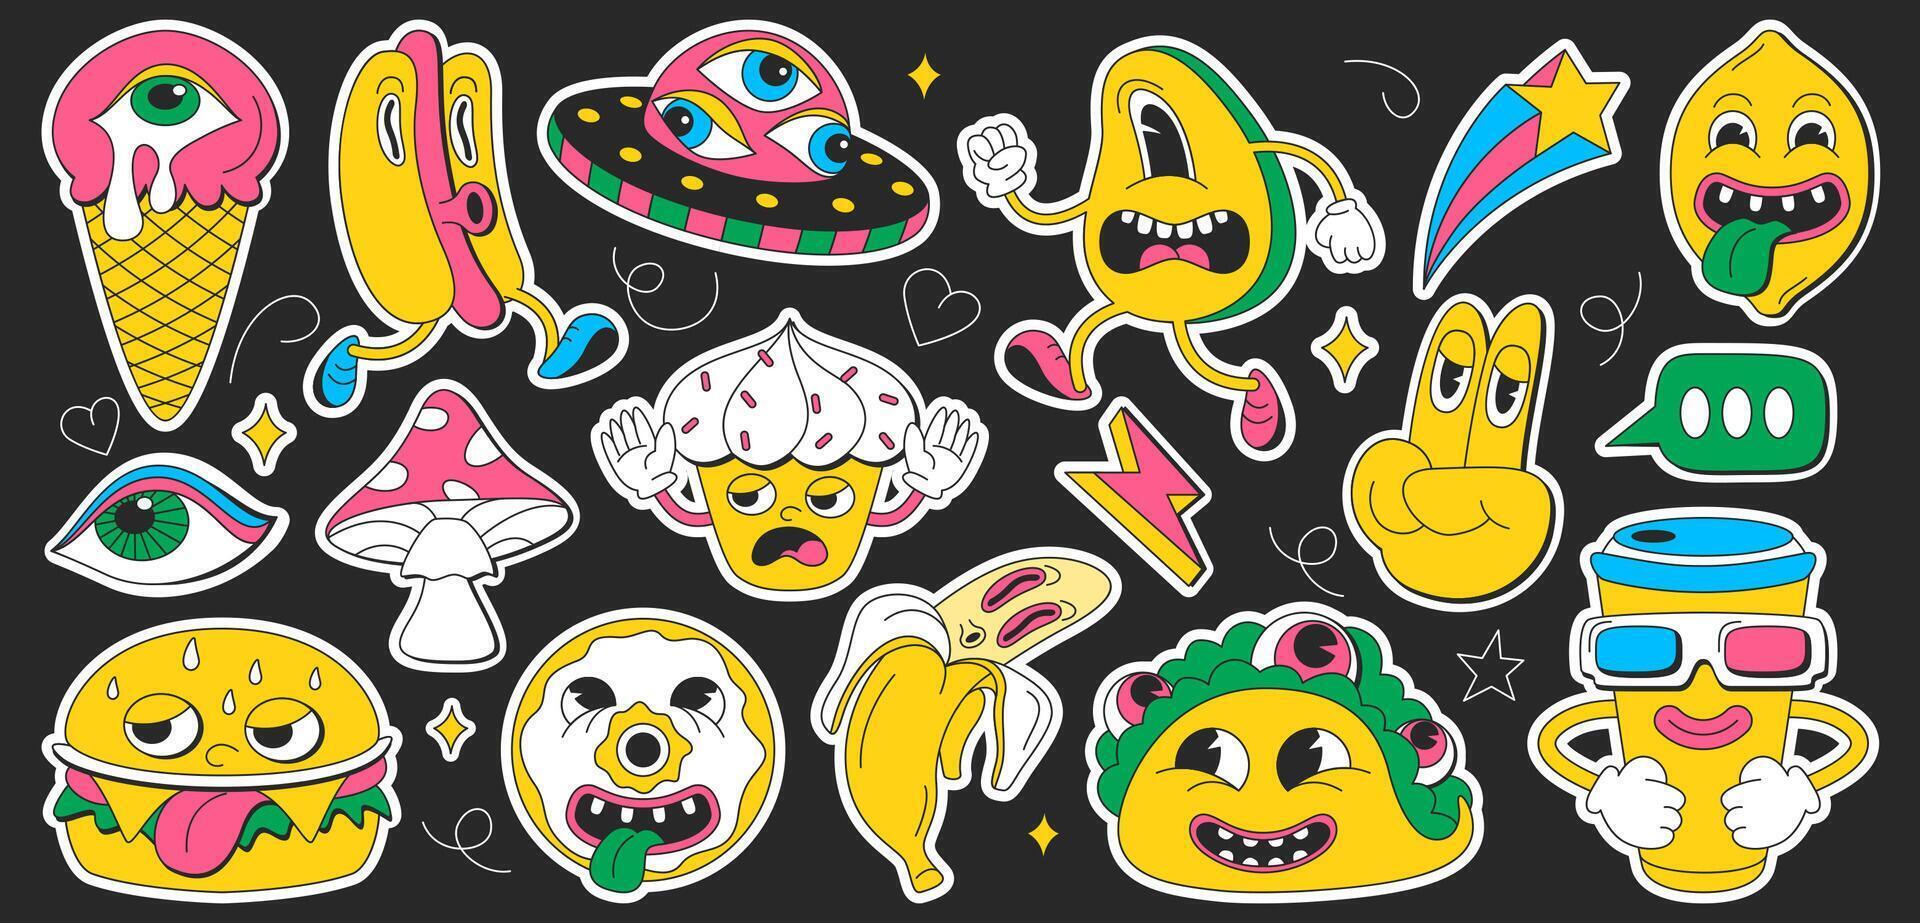 Psychedelic cartoon groovy sticker set with retro surreal elements. Trendy characters with funny faces. Hippy symbols in contemporary design on black background. Fast food, eyes and crazy icons vector